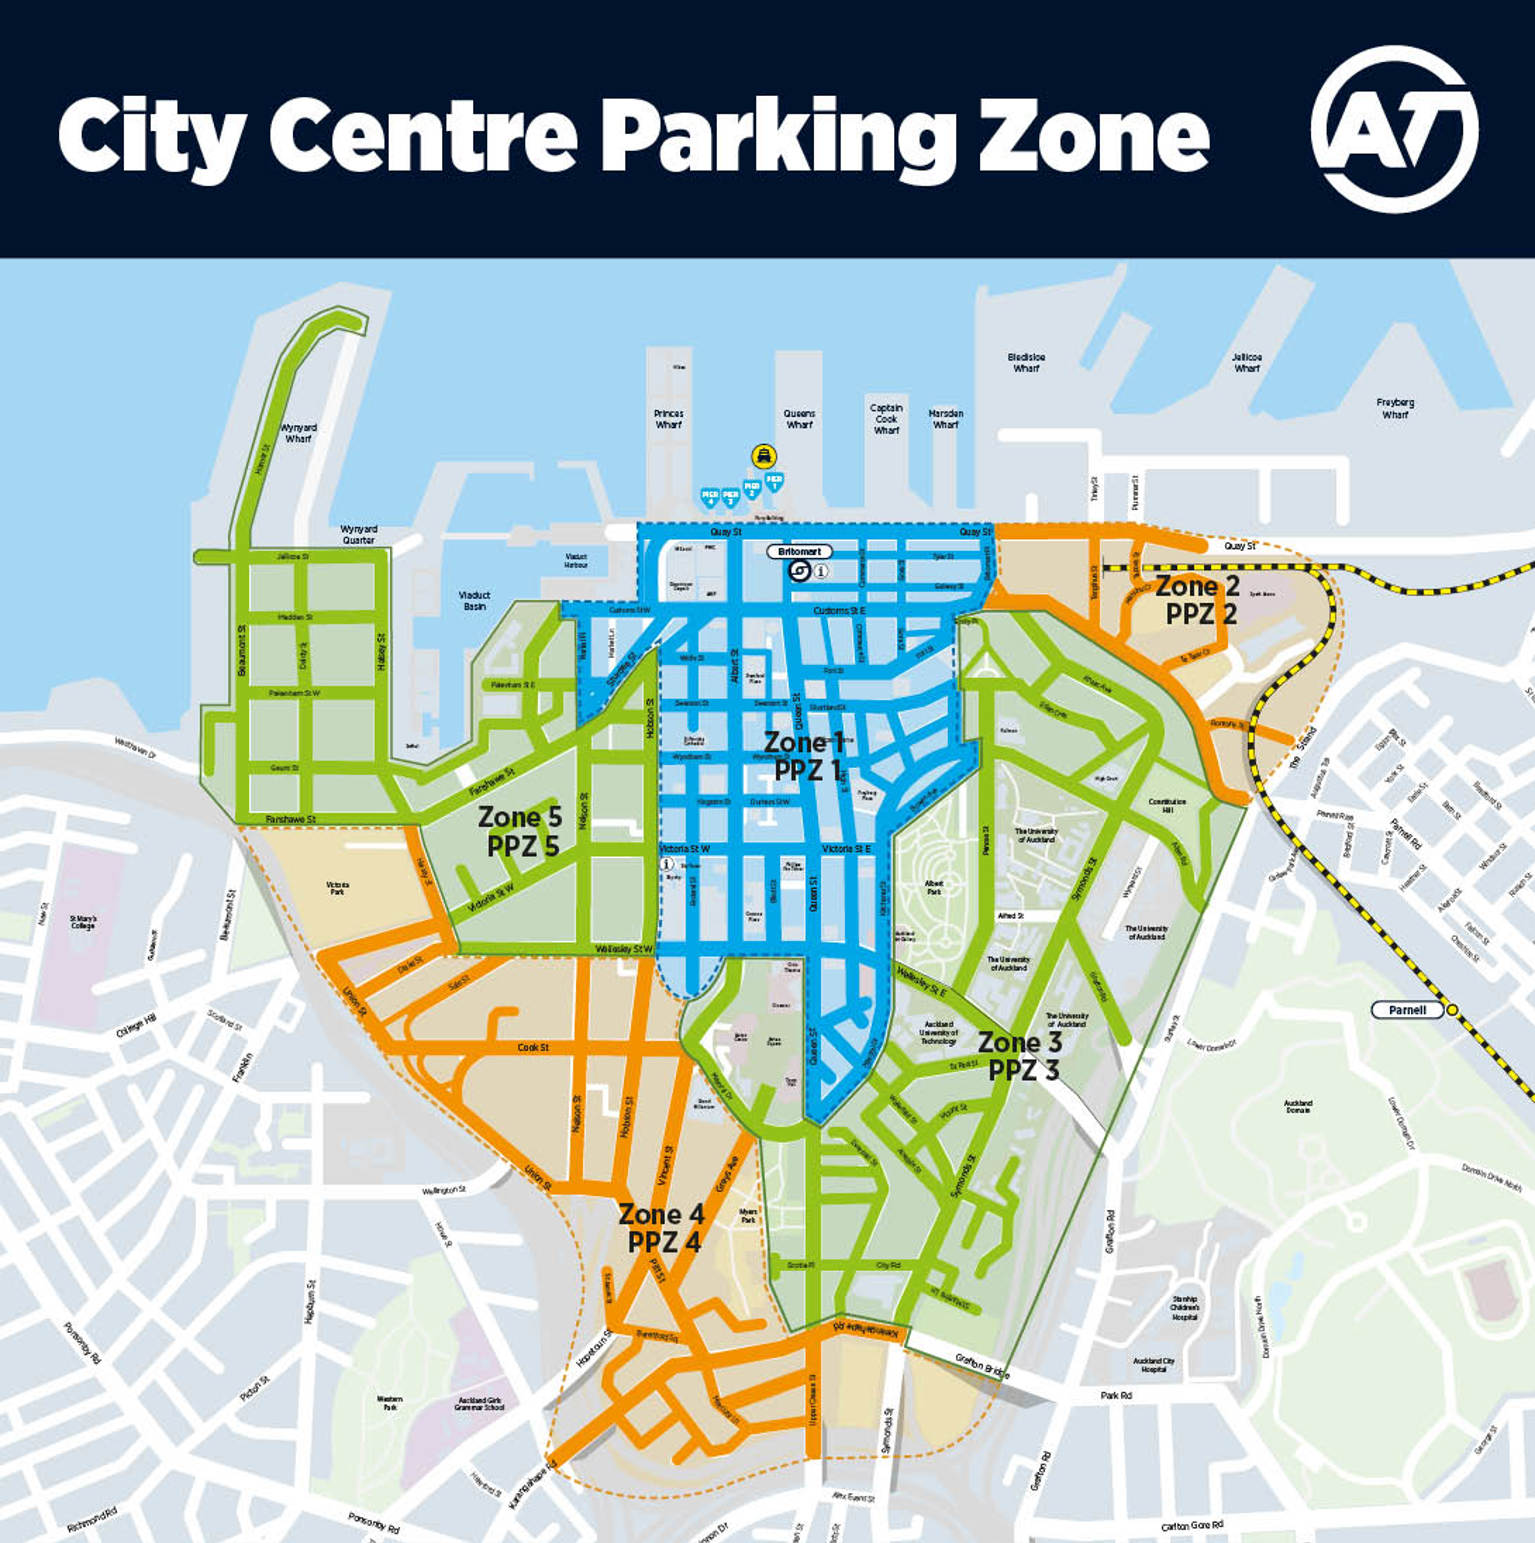 Map of City Centre Paid Parking Zone showing zone 1 in blue, zones 2 and 4 in orange, and zones 3 and 5 in green.